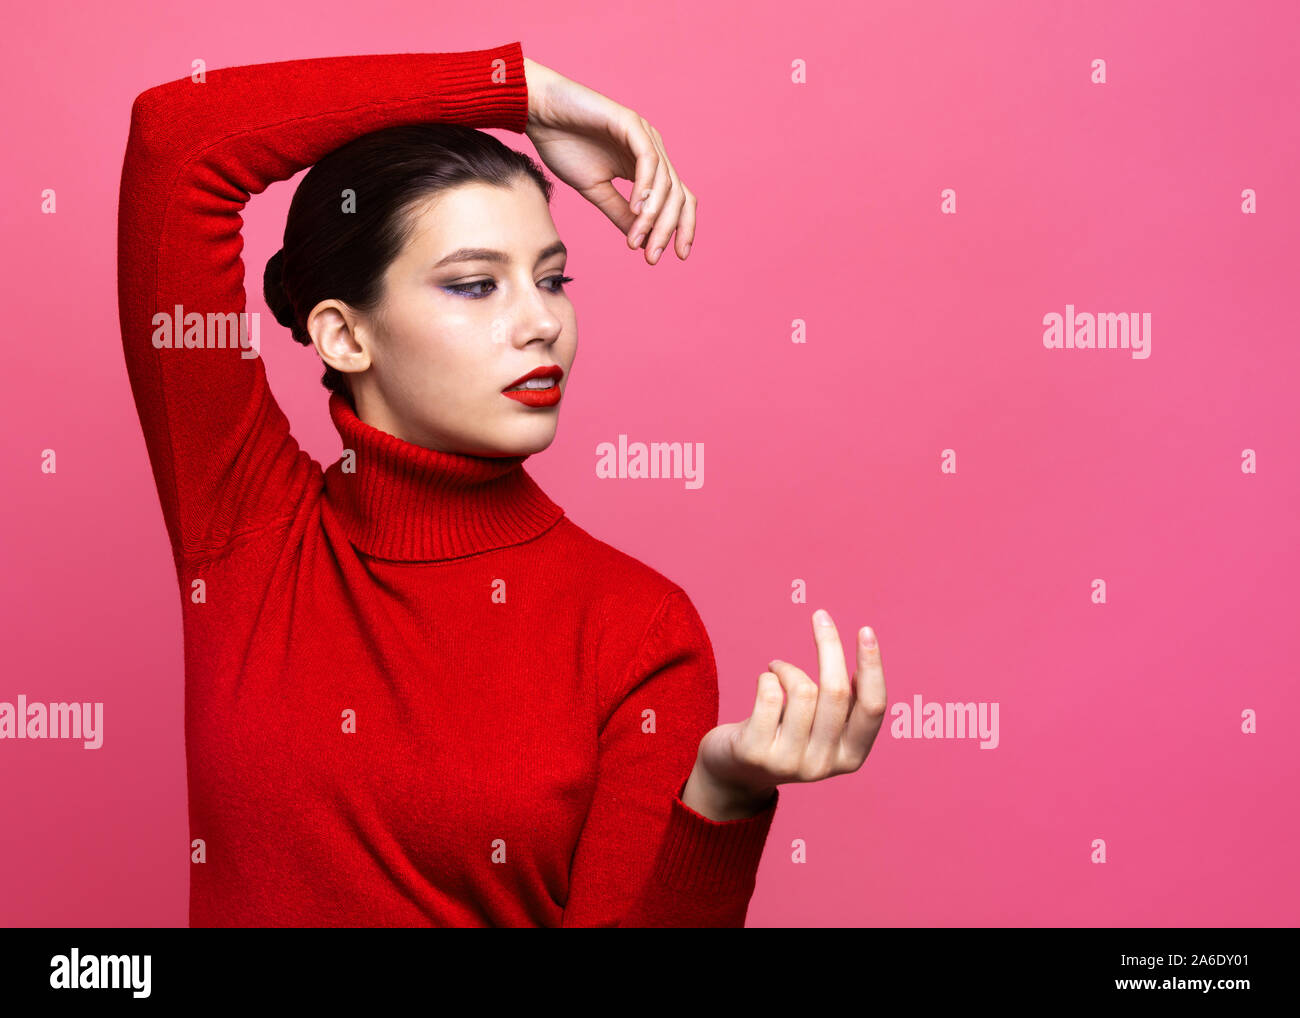 girl in red sweater posing on pink background Stock Photo